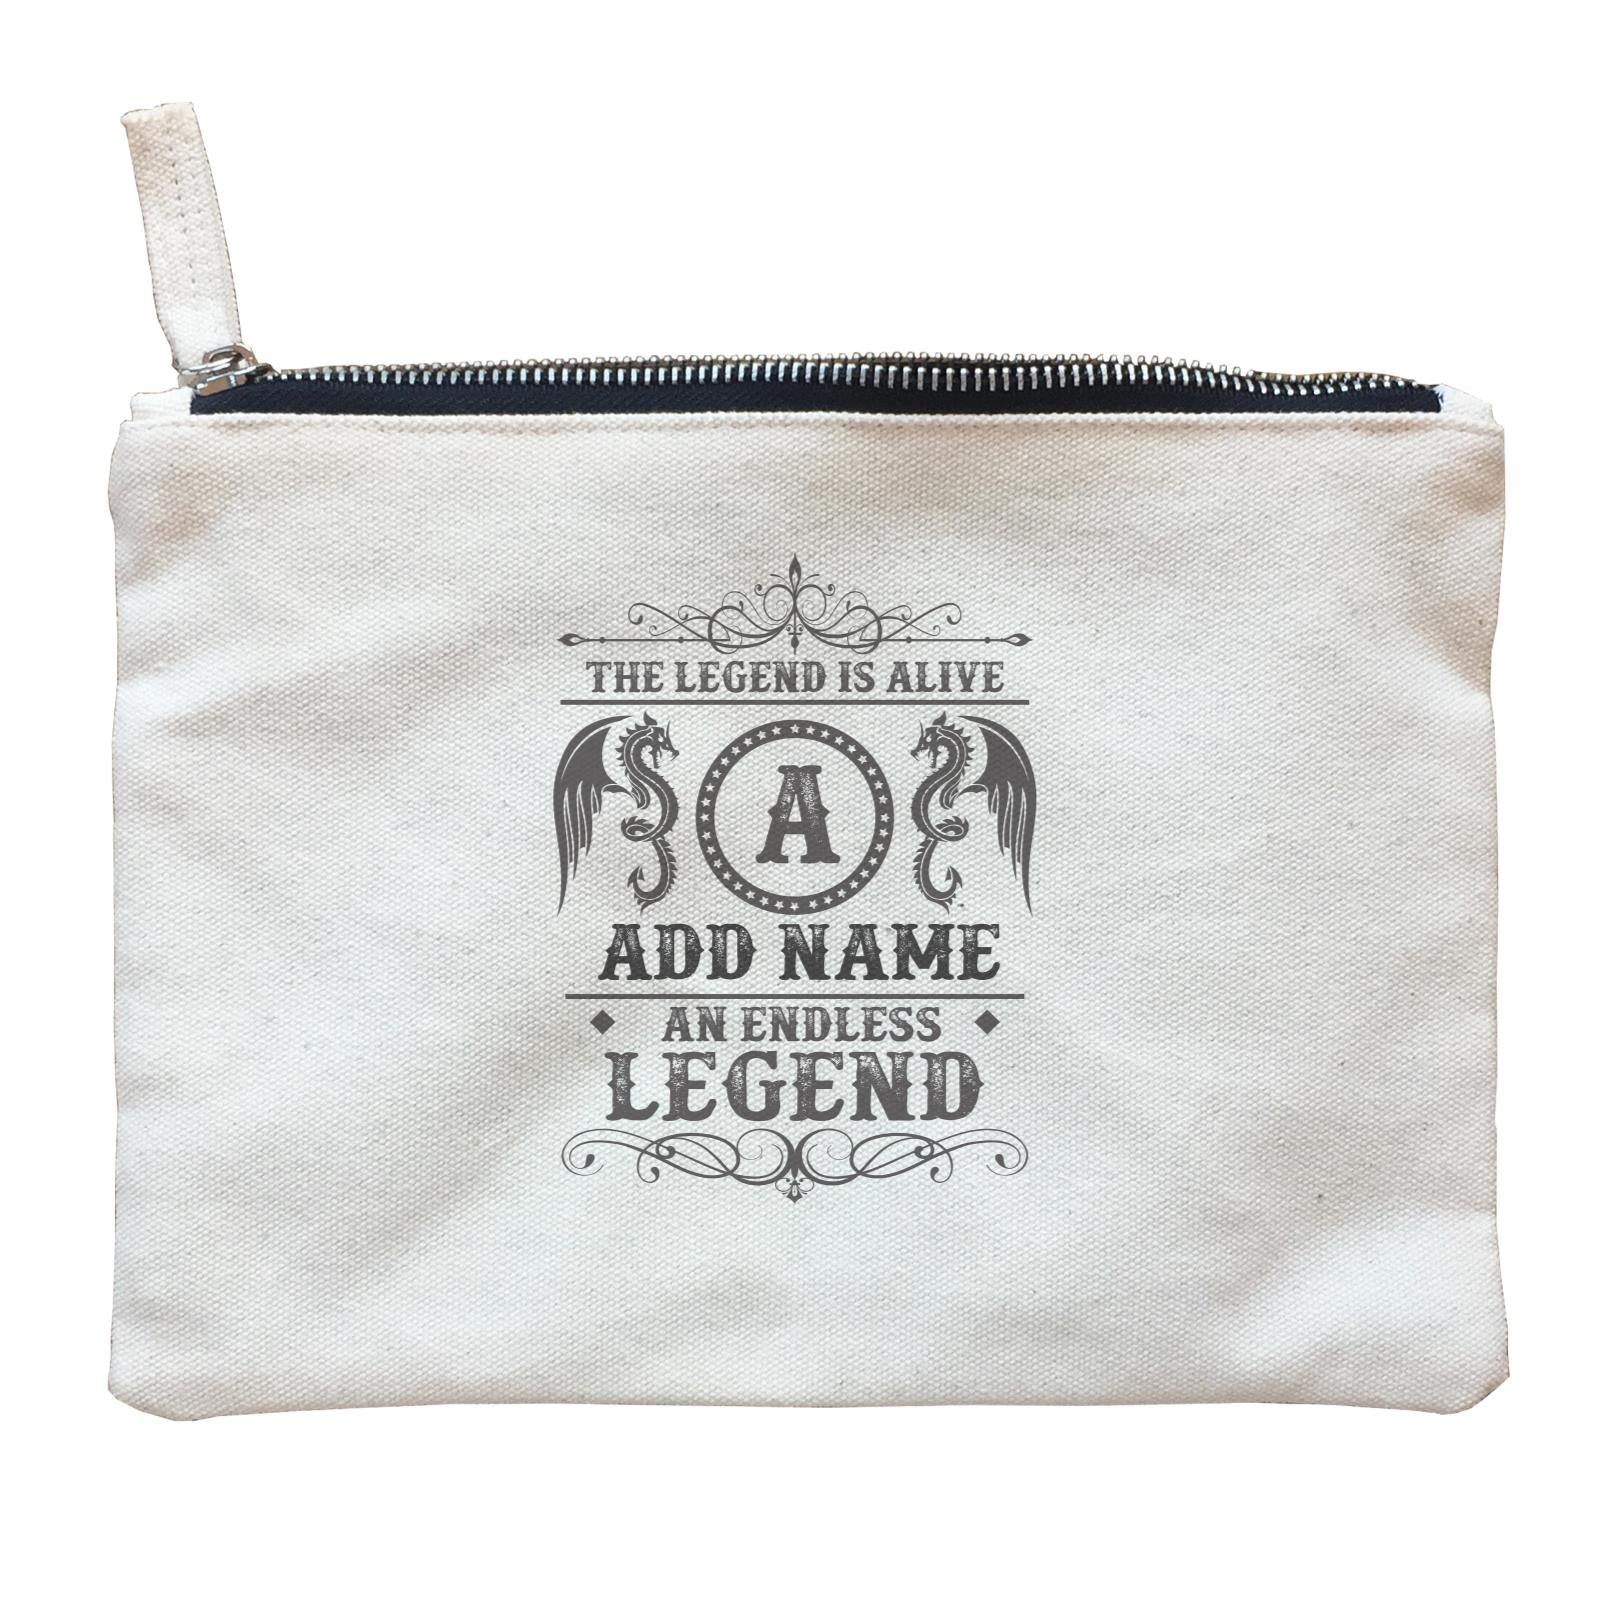 Personalize It Awesome The Legend Is Alive An Endless Legend with Add Initial and Addname Zipper Pouch